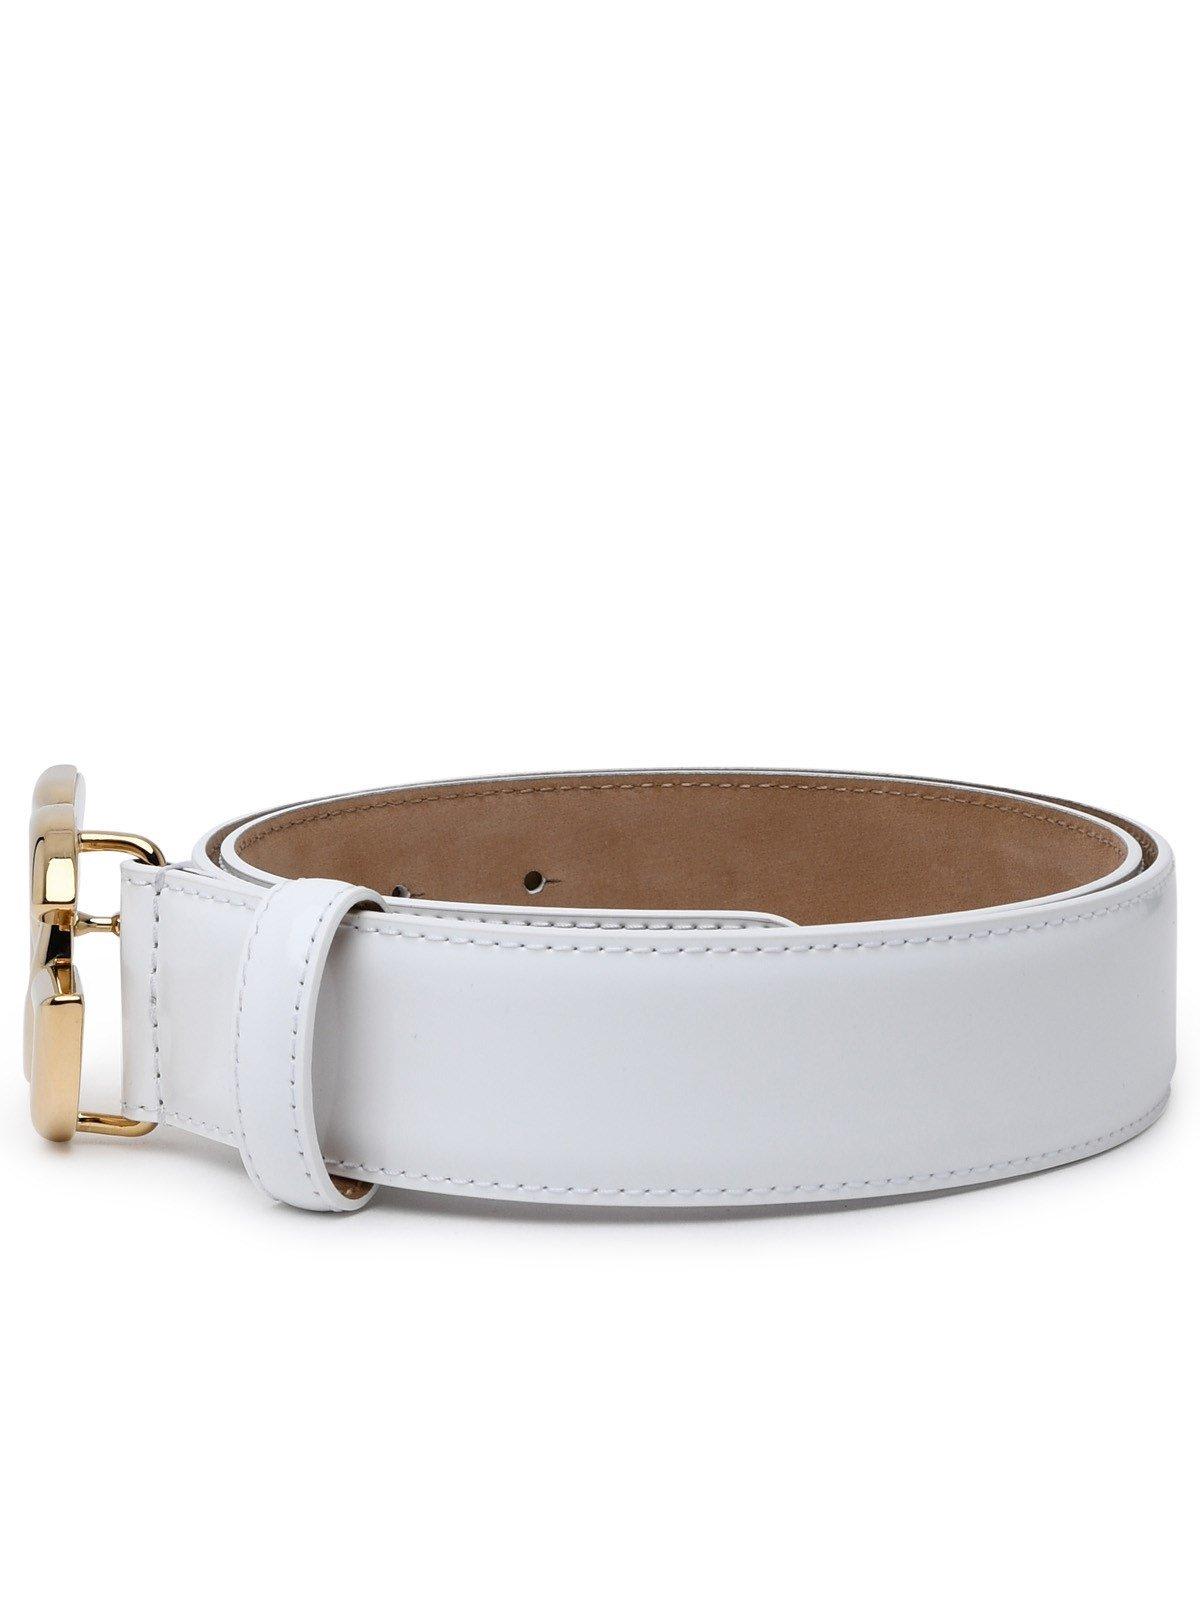 Global trade starts here 100% Authentic White Leather Belt Bianco Dolce ...